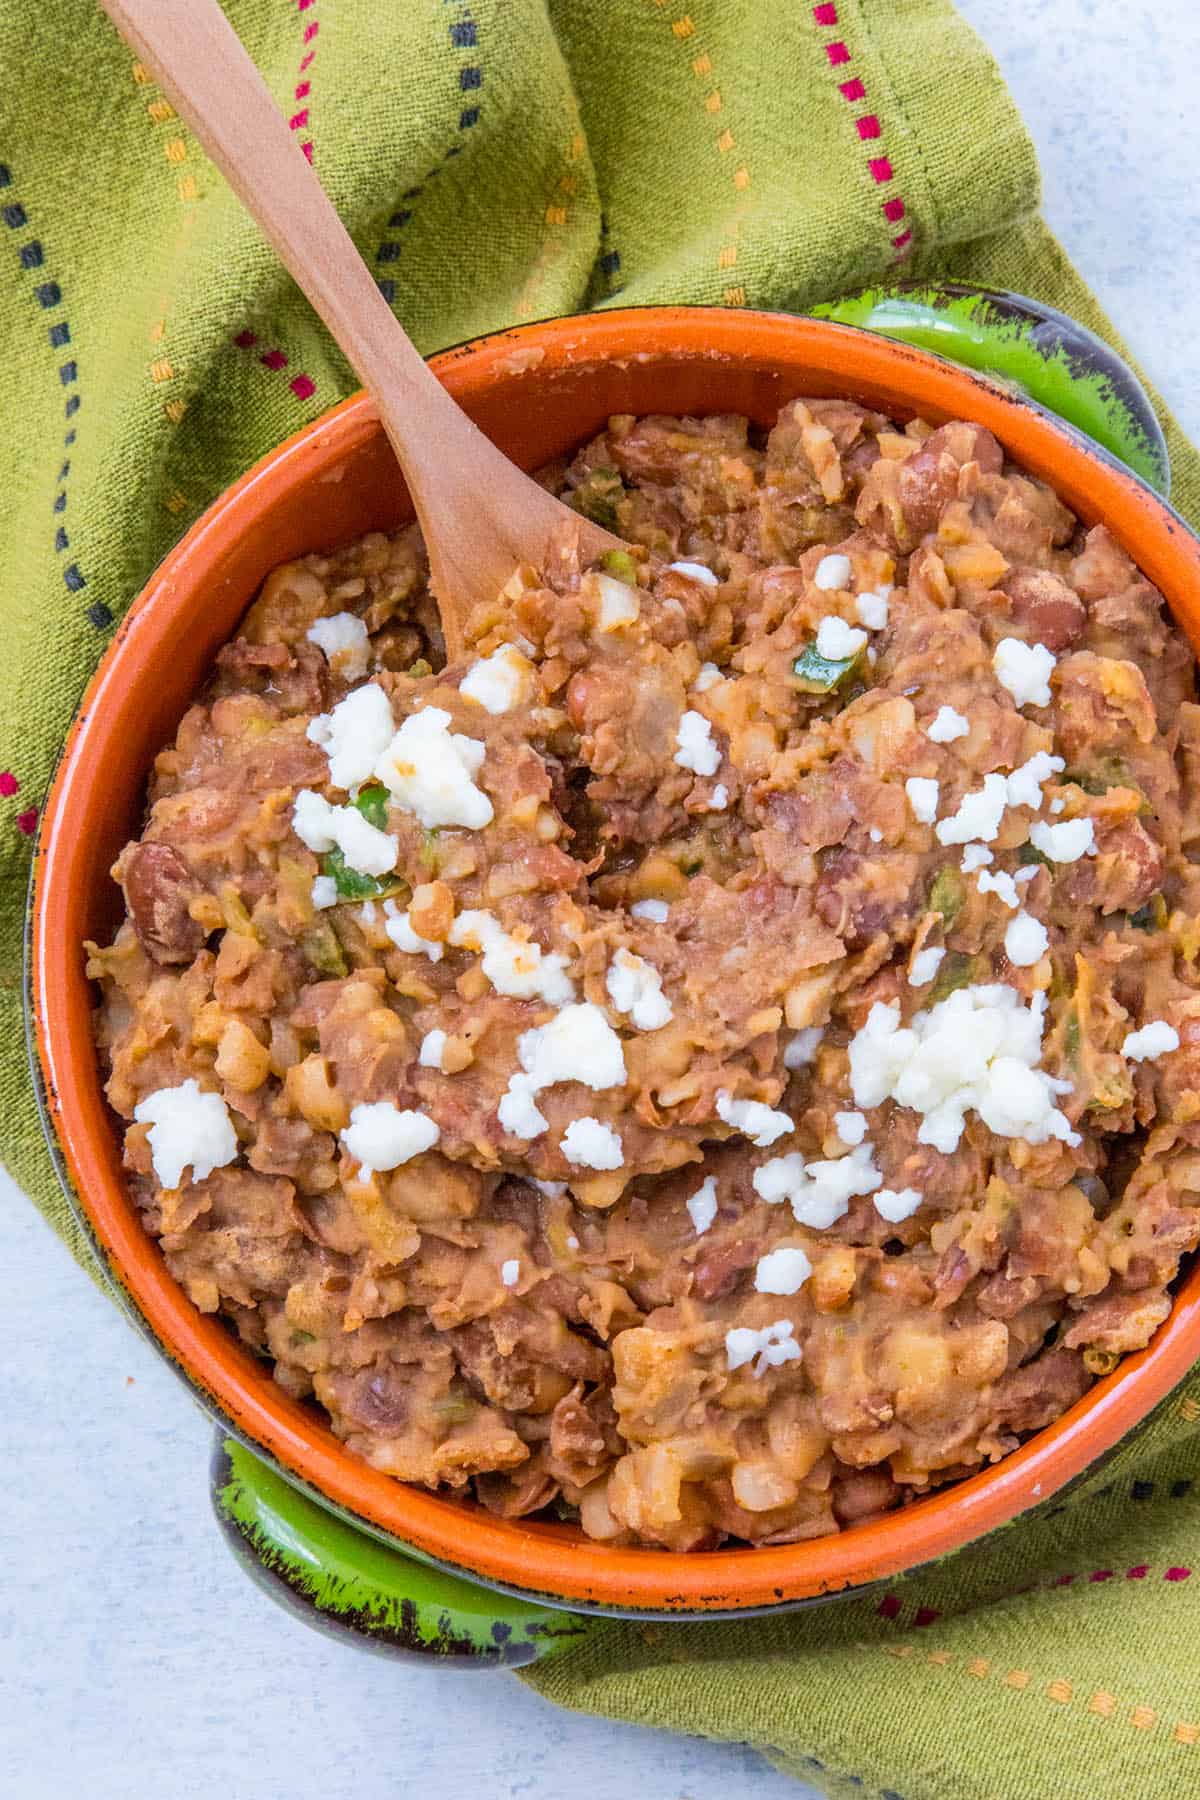 Easy Homemade Refried Beans in a bowl, ready to eat